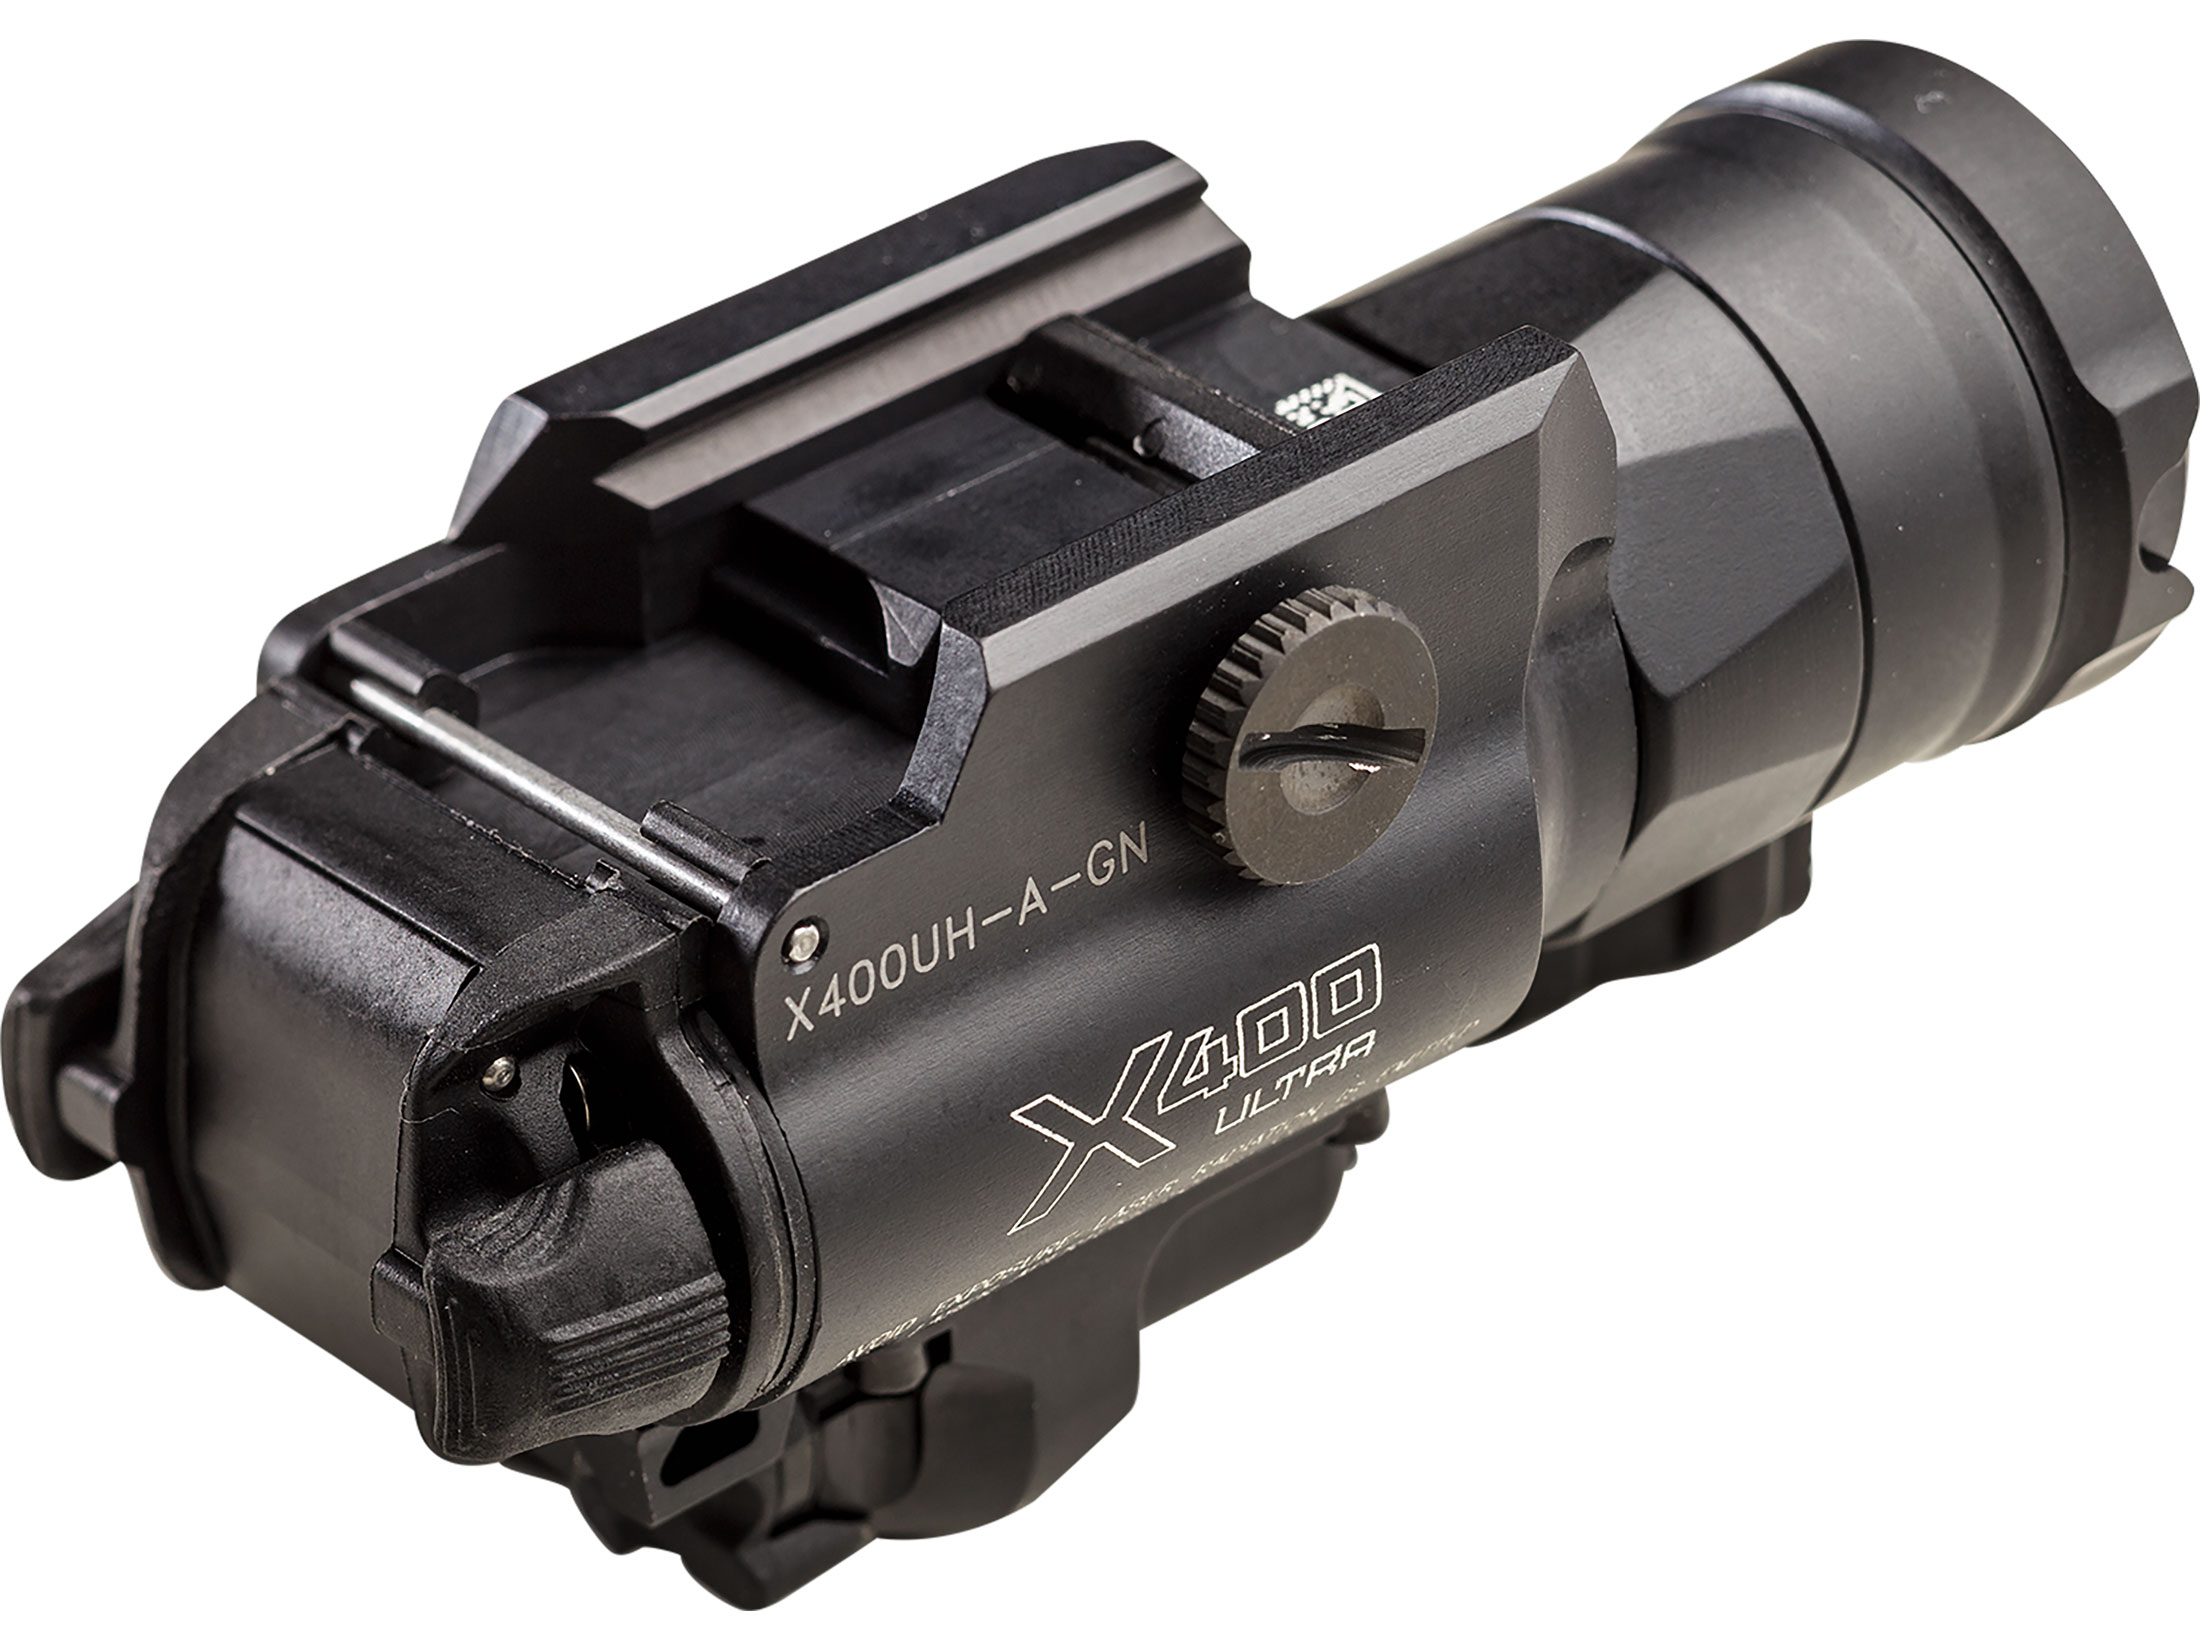 Surefire X400UH-A-GN Masterfire Rapid Deployment Weapon Light LED with Green Laser with 2 CR123A Batteries Aluminum Black For Sale